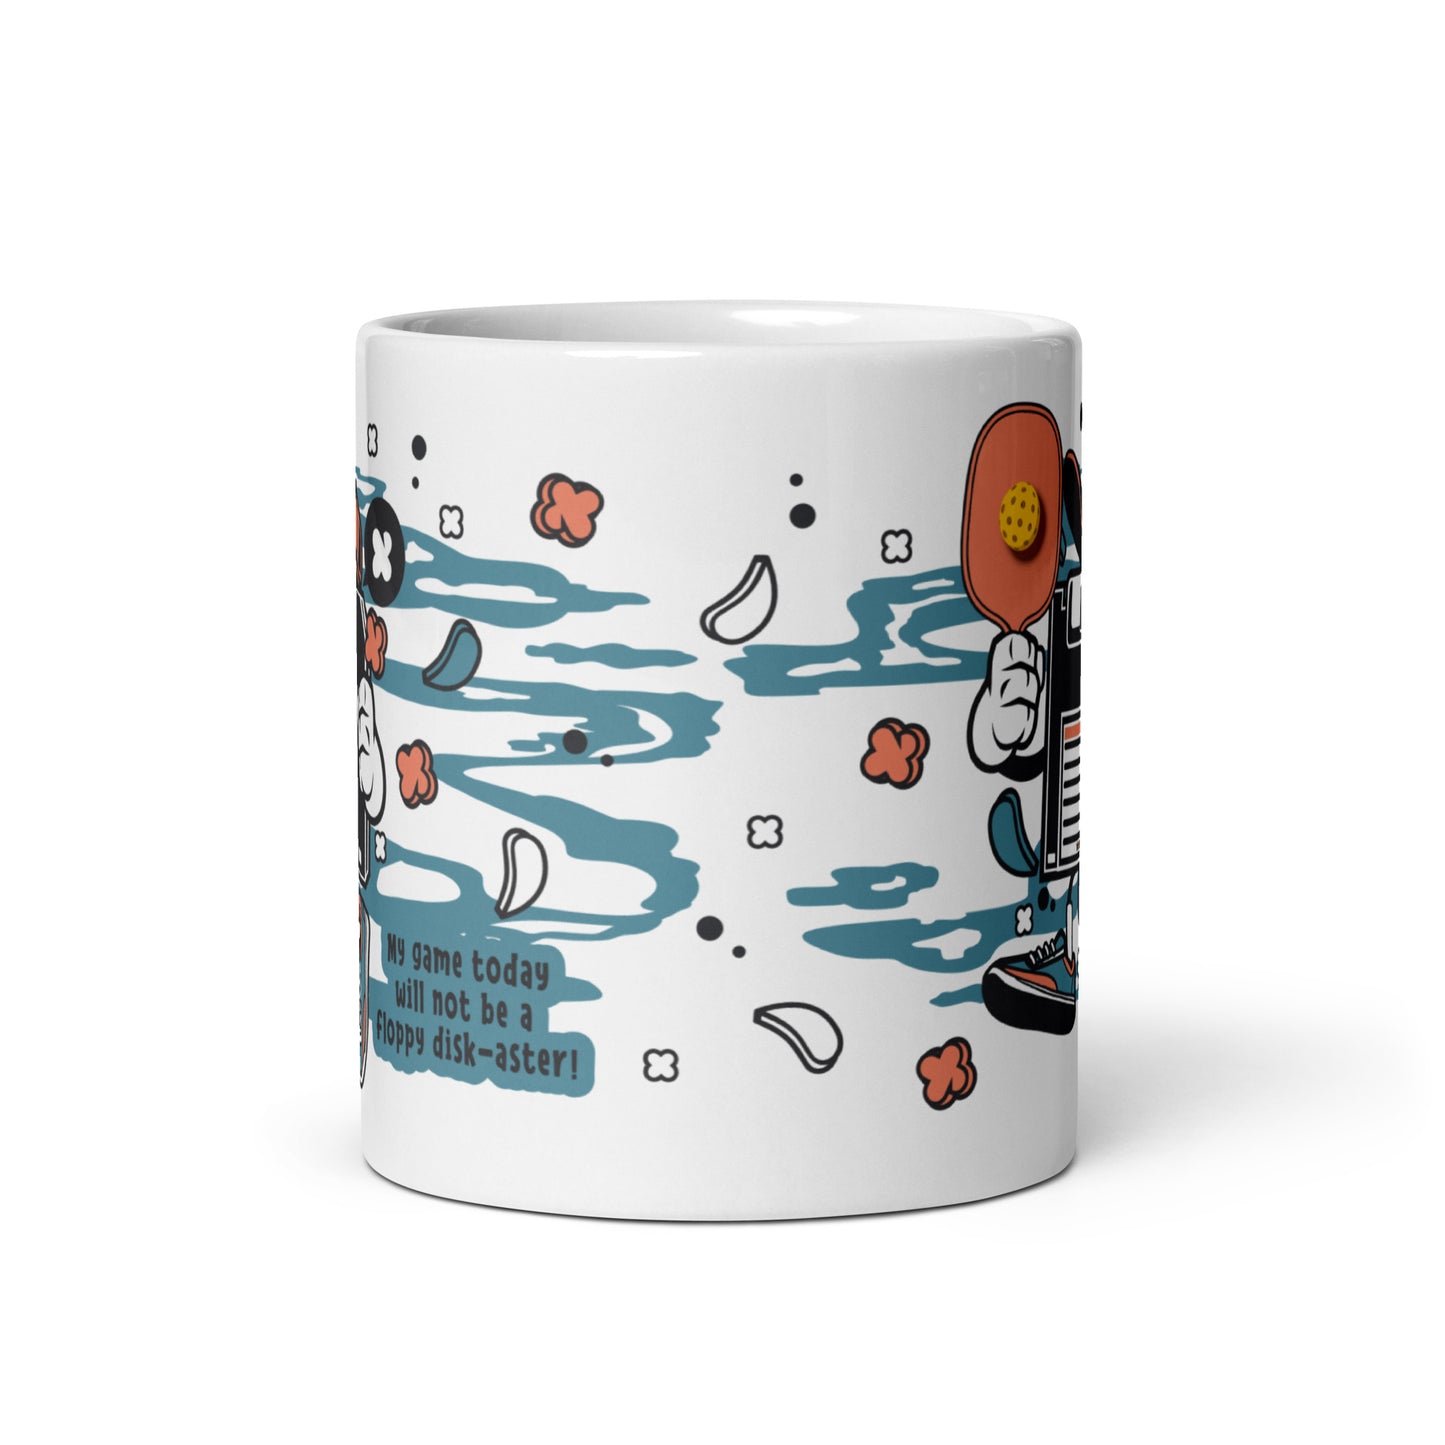 Fun Puns on Pickleball Coffee White Glossy Mug, "My Game Today Will Not Be A Floppy Disk-Aster"